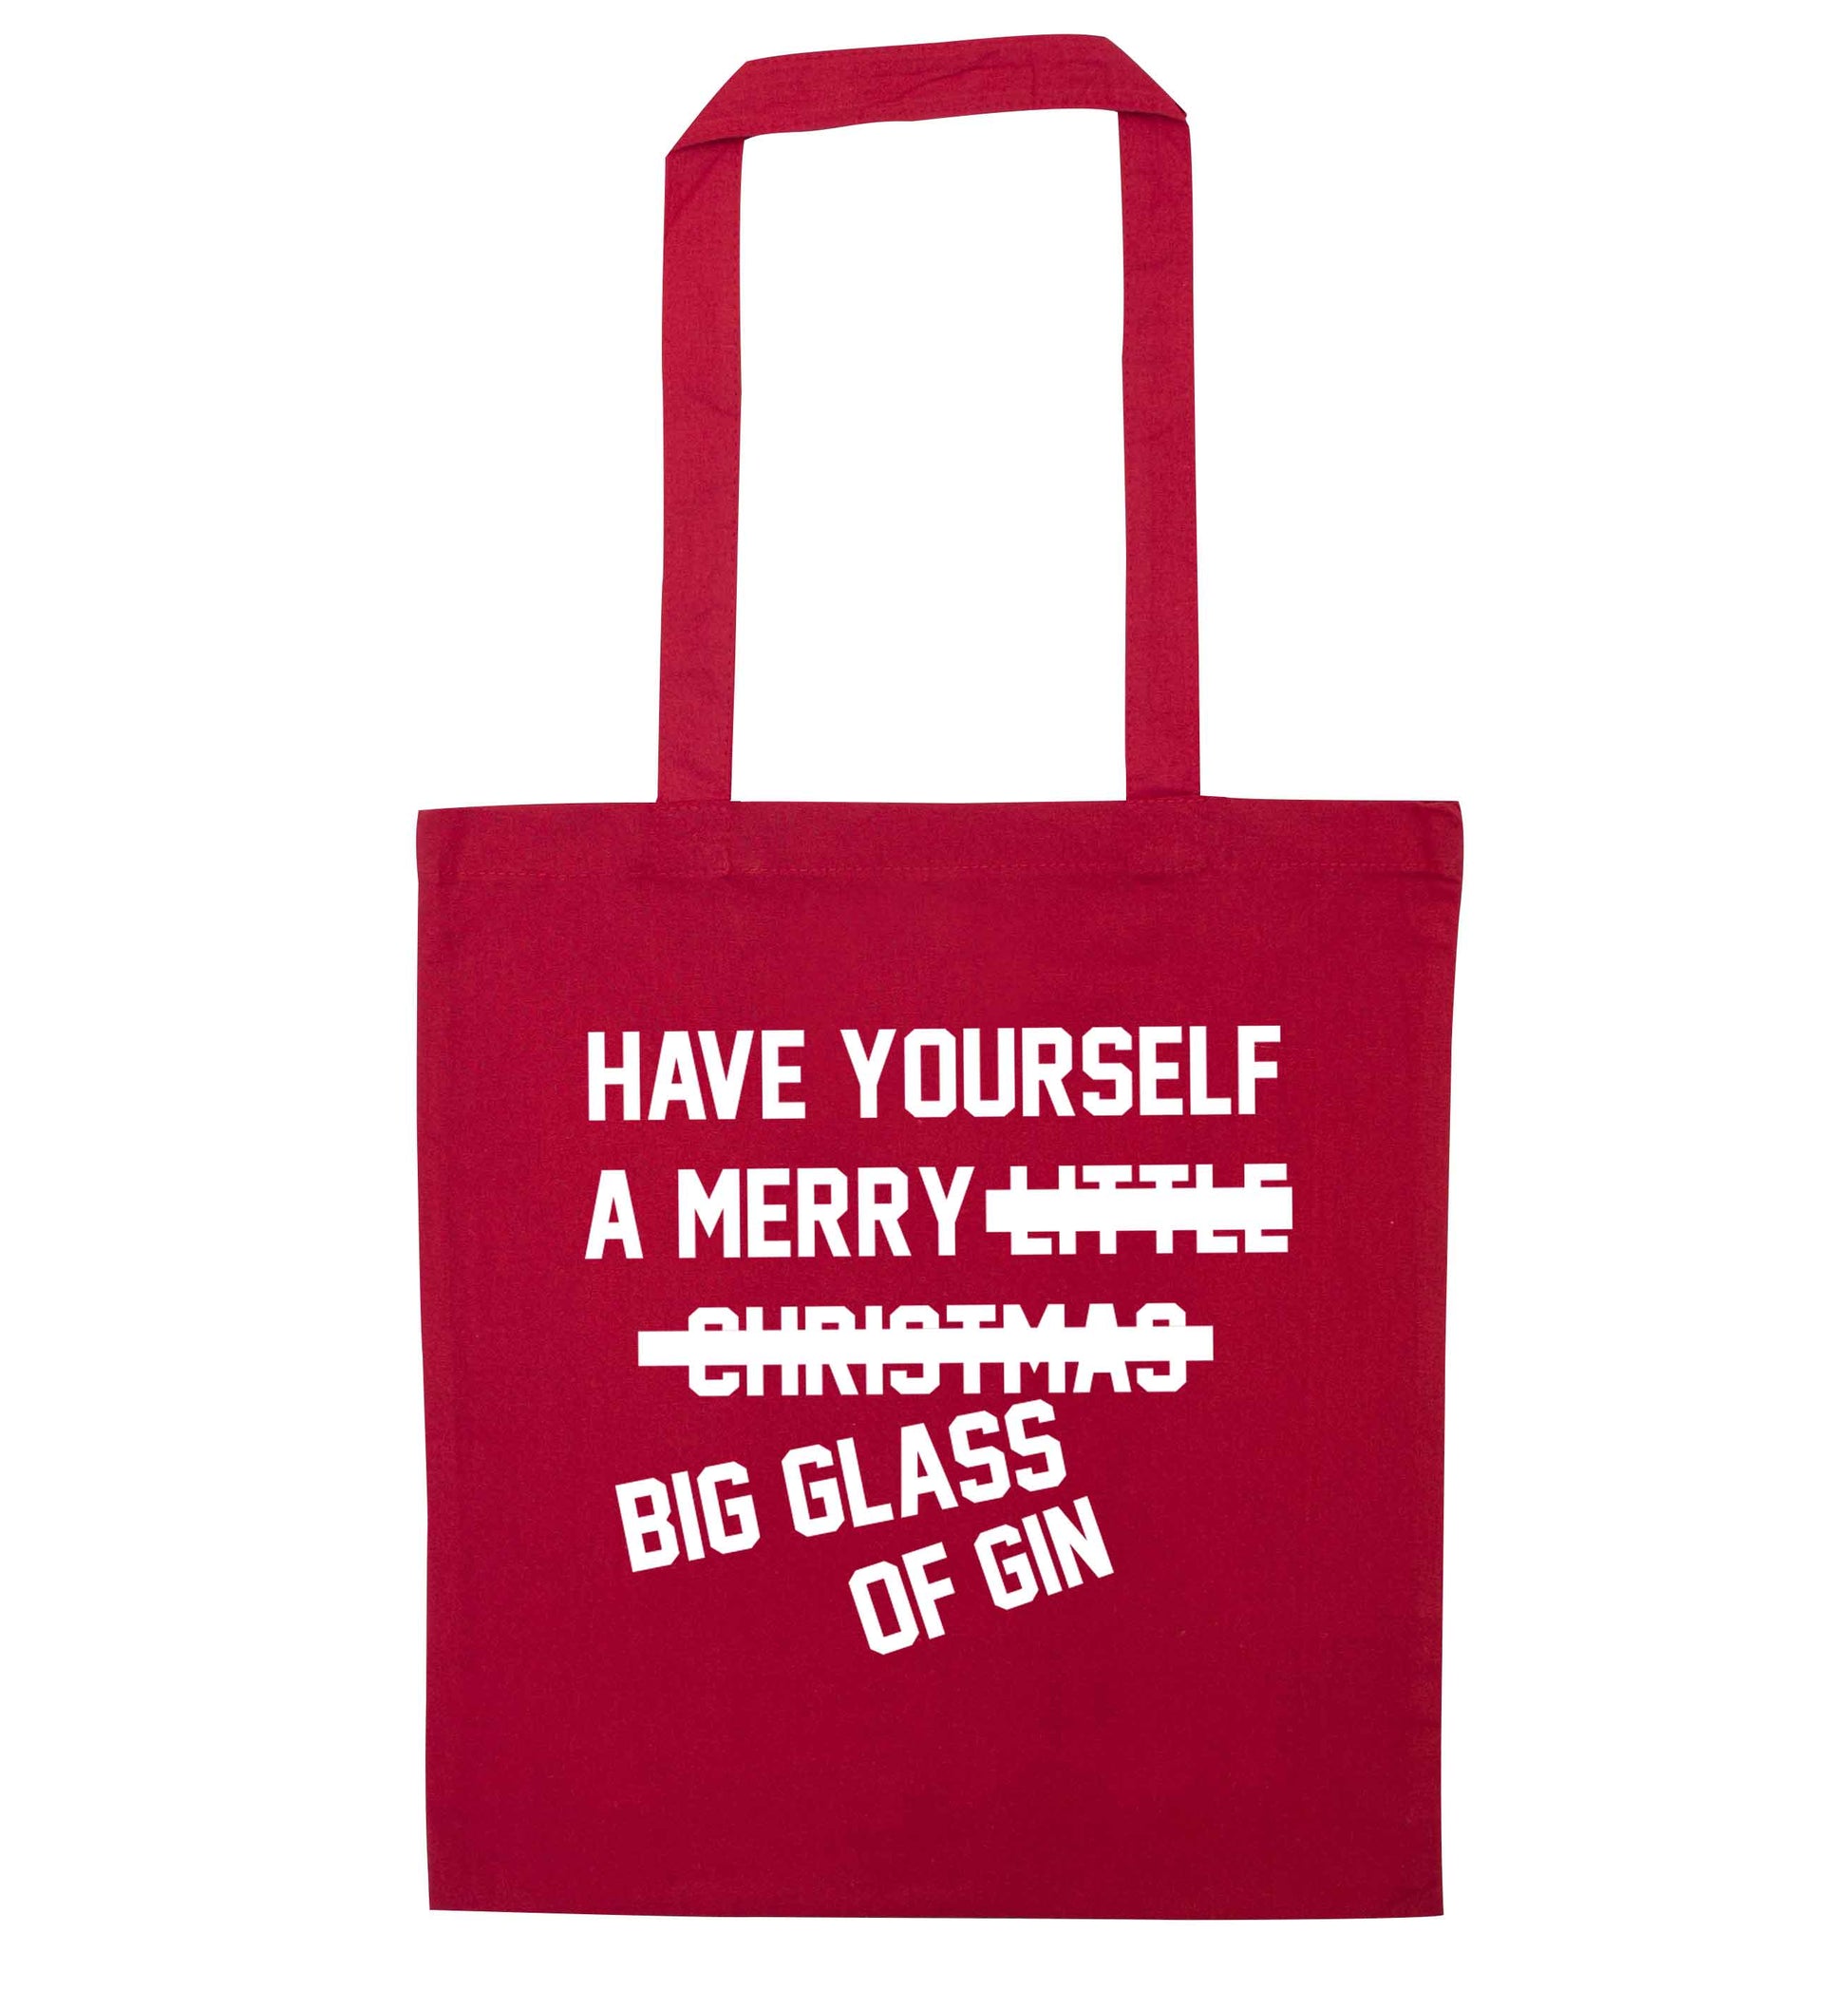 Have yourself a merry big glass of gin red tote bag